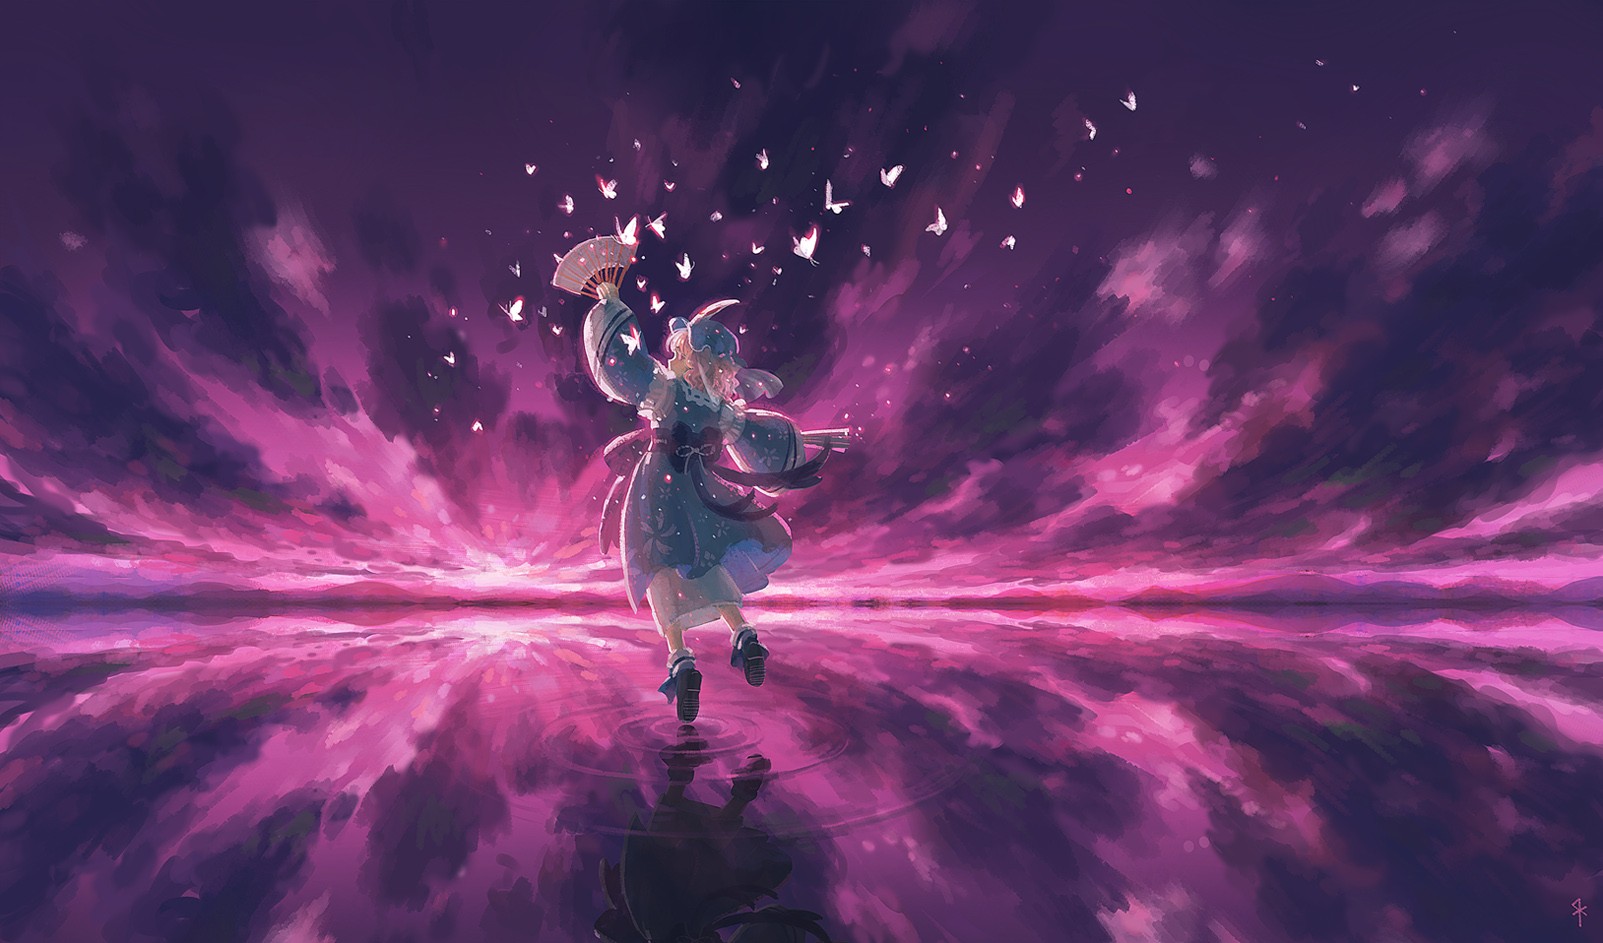 water, Video, Games, Clouds, Touhou, Dress, Socks, Pink, Hair, Short, Hair, Bows, Pink, Eyes, Veil, Saigyouji, Yuyuko, Blue, Dress, Skyscapes, Reflections, Hats, Japanese, Clothes, Anime, Girls, Spread, Arms, Lo Wallpaper